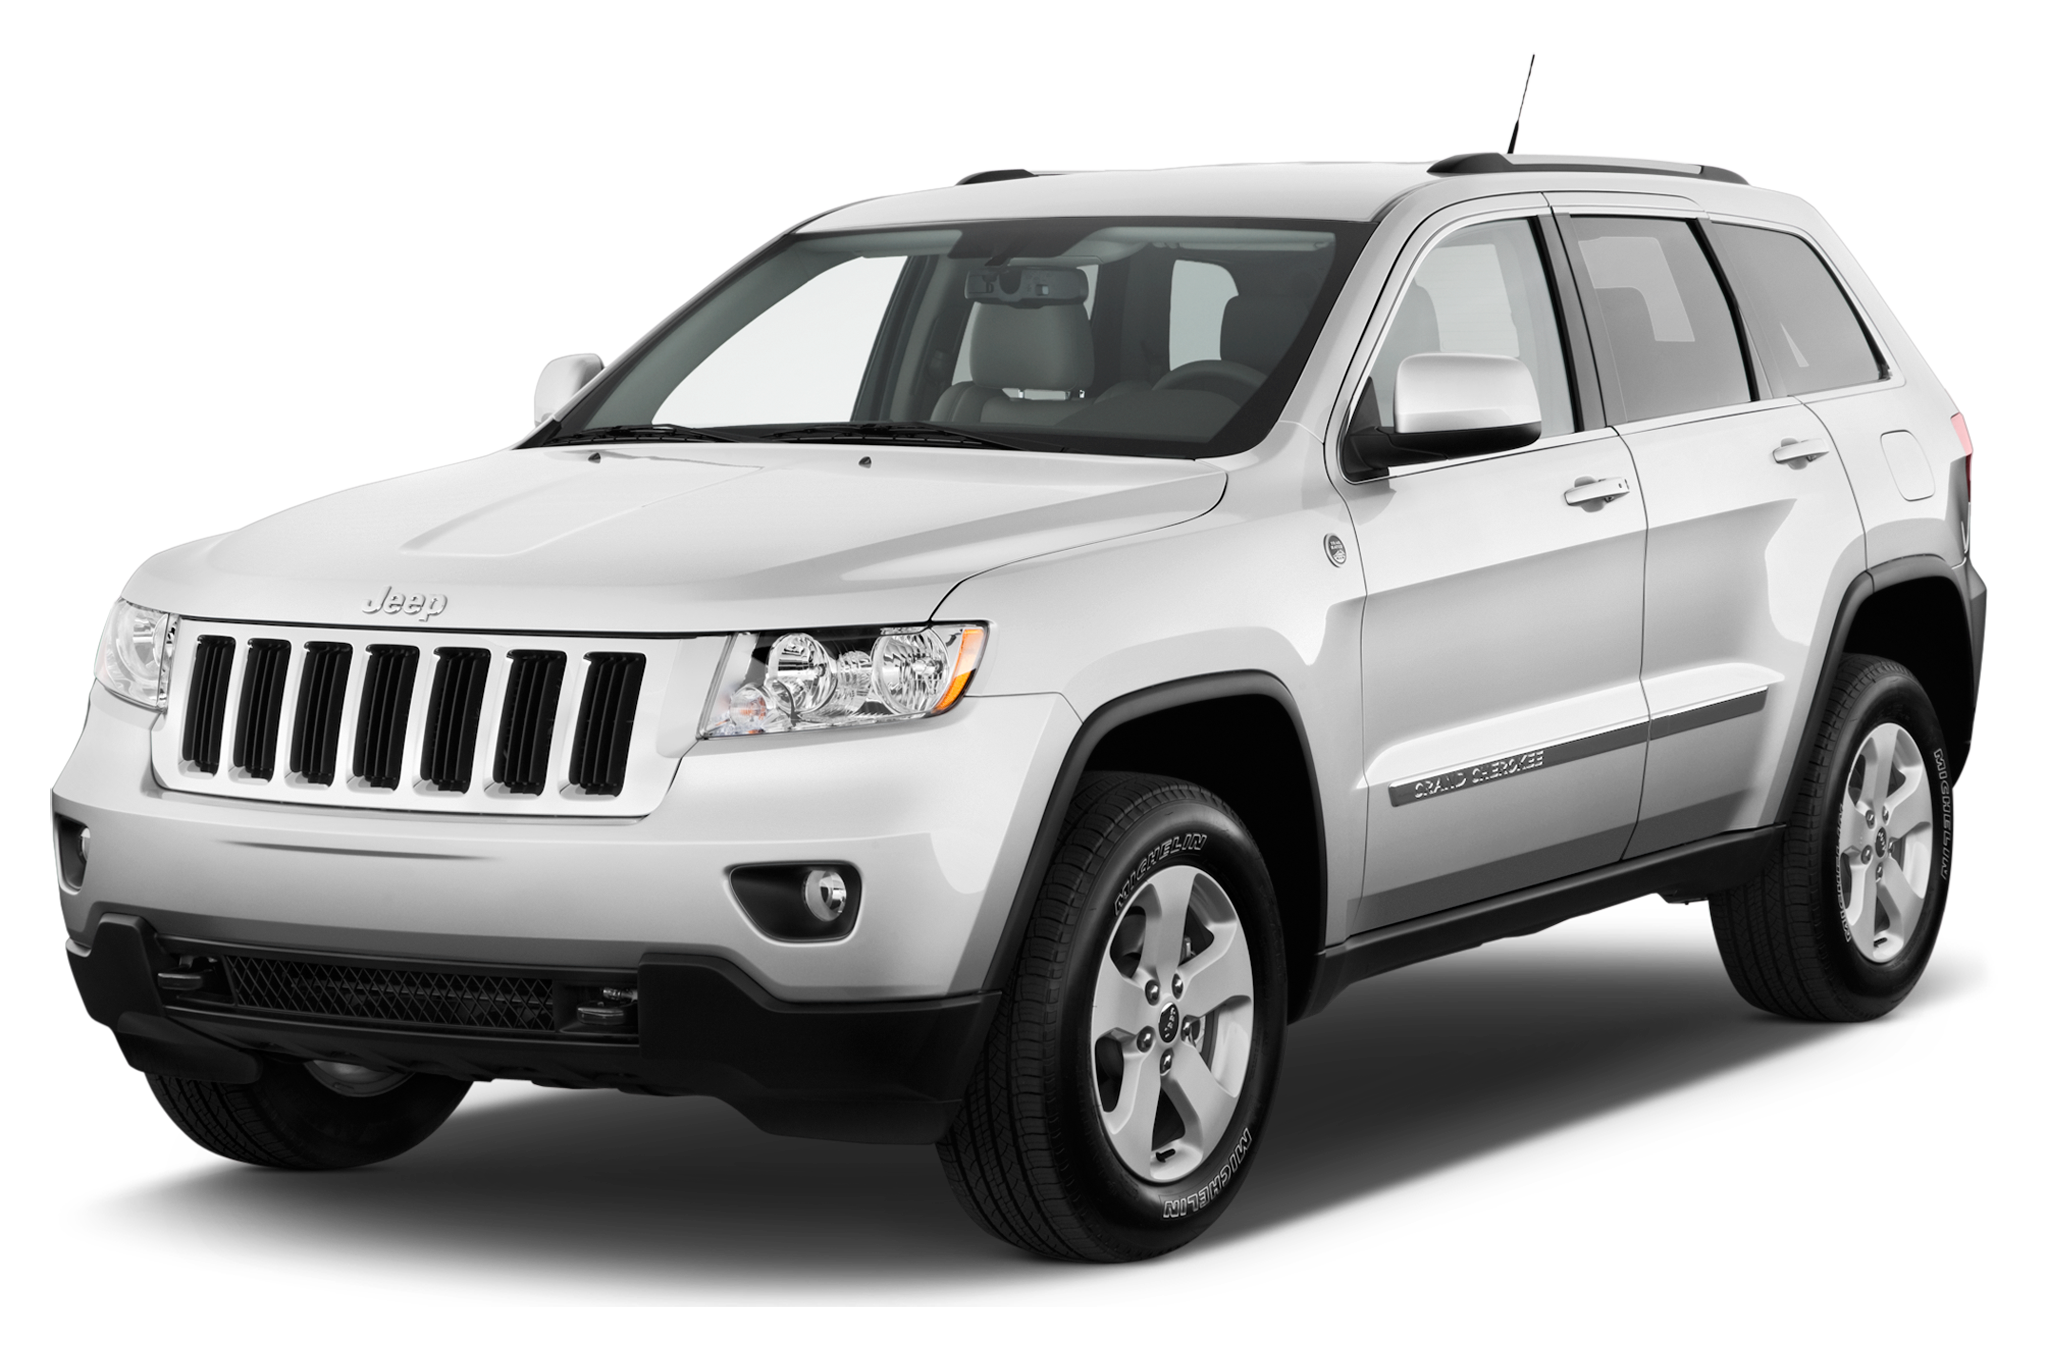 2013 Jeep Grand Cherokee Overview MSN Autos